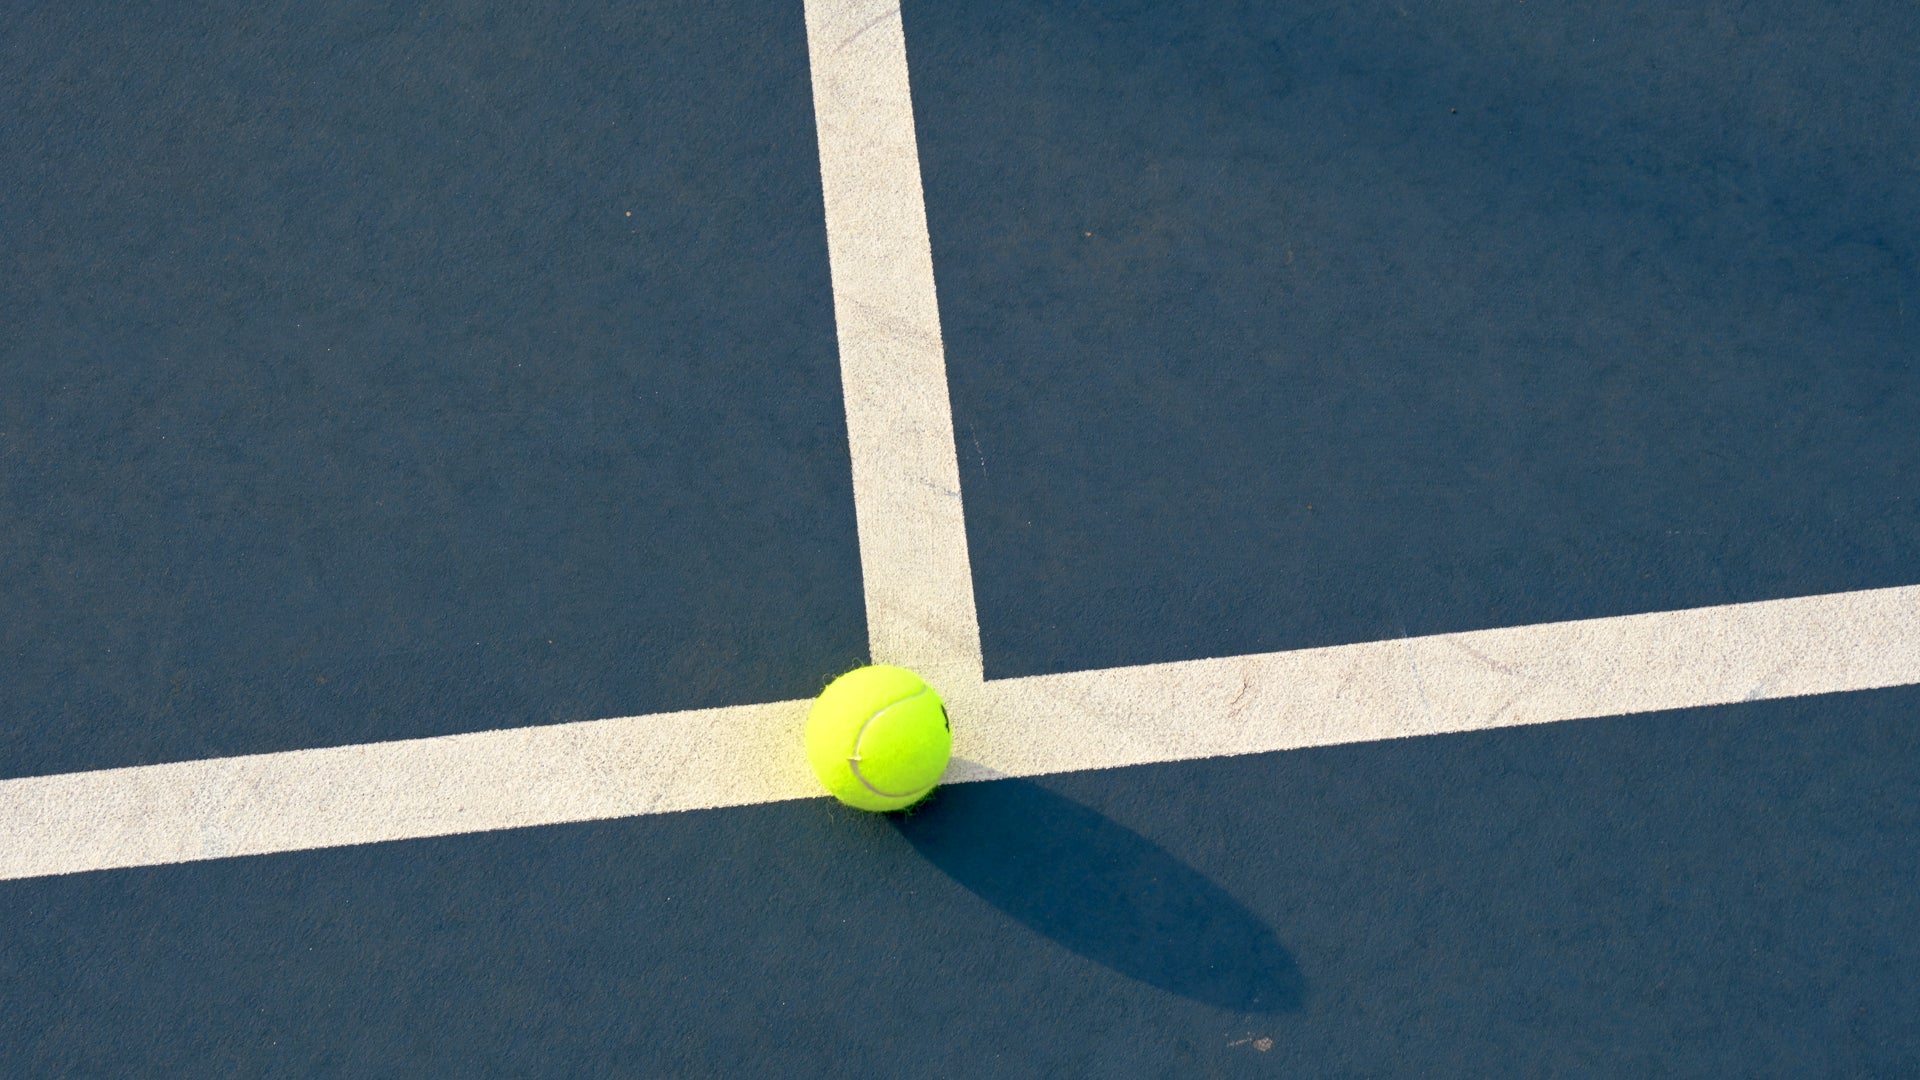 Doubles Tennis 101: A Beginner's Guide to Doubles Tennis Rules